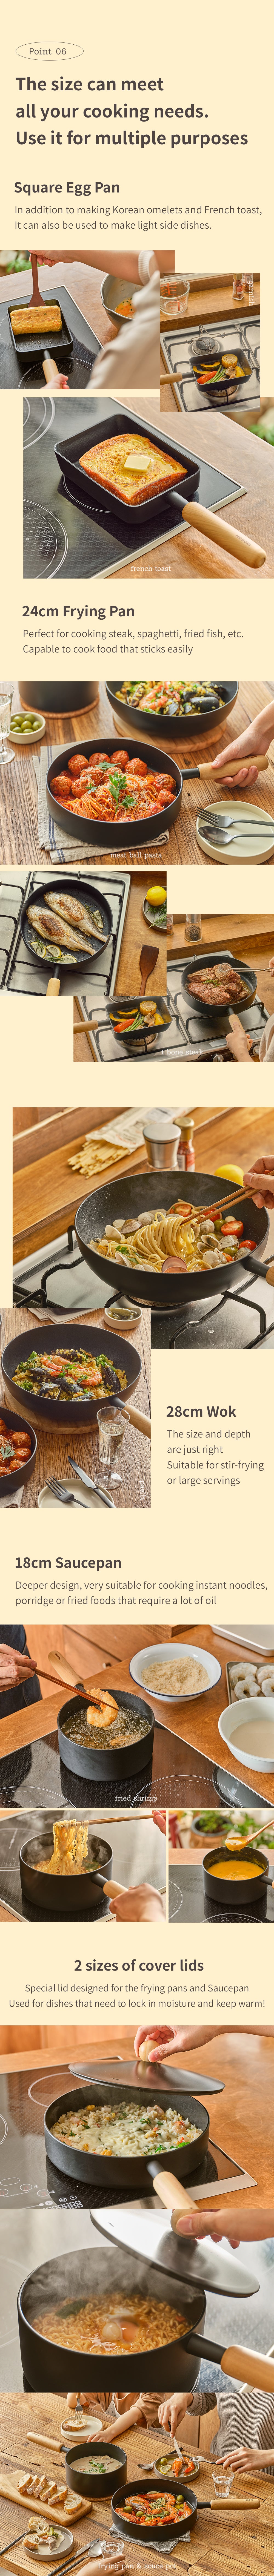 Modori Goodle Collection 28cm wok is the best-selling size in the goodle range, it is capable of handling large portions of ingredients, and with its large surface and deep design, you can easily flip and stir your ingredients, perfect for stir-frying and large servings. Special Inoble coating patented oil method that enhances the non-stick effects and makes it easier to clean after use and requires minimal maintenance. Suitable for cooking with various stoves.